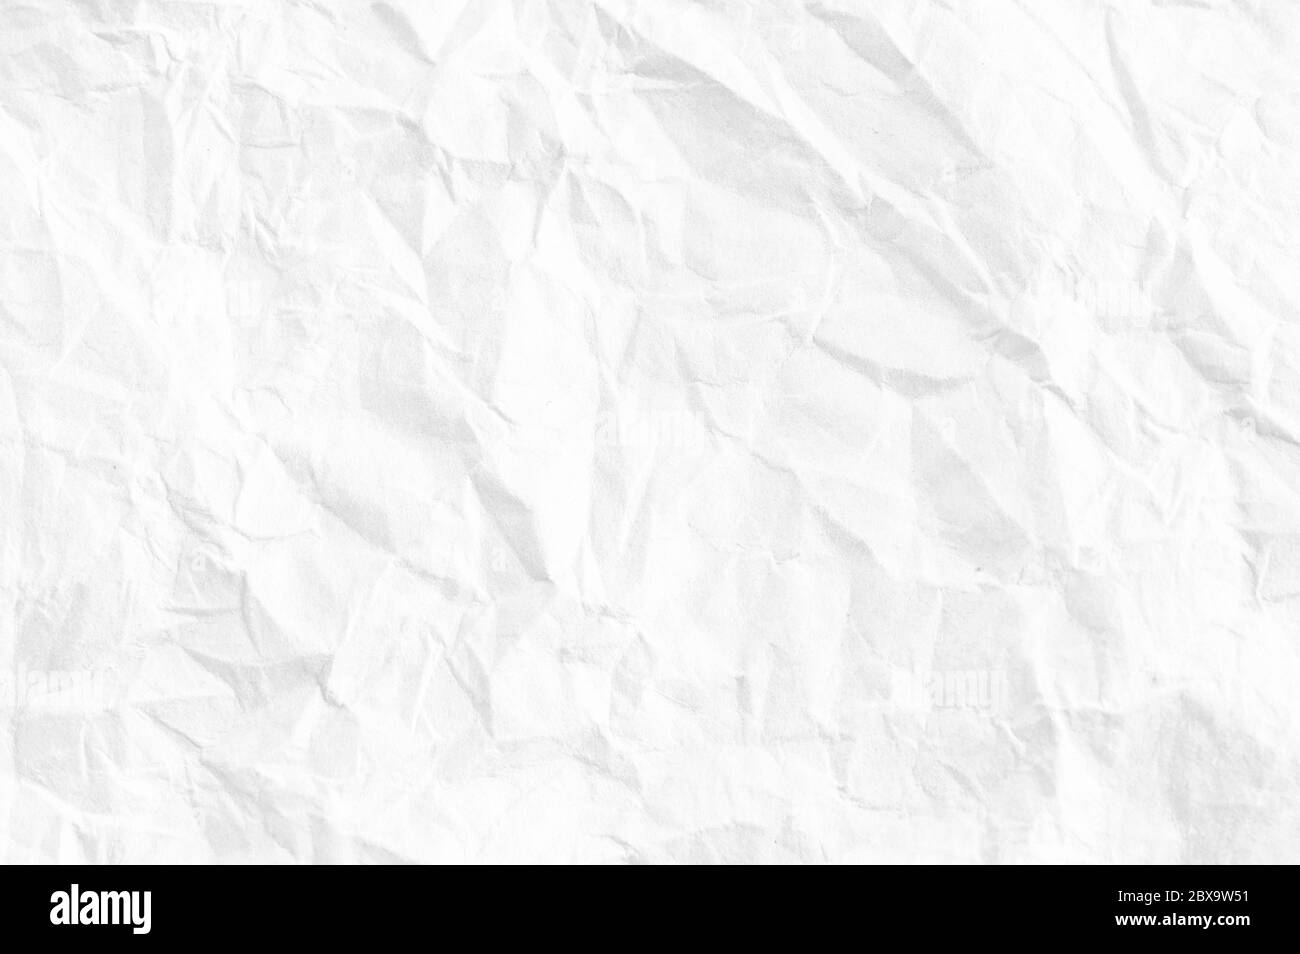 white-crumpled-paper-texture-background-stock-photo-alamy